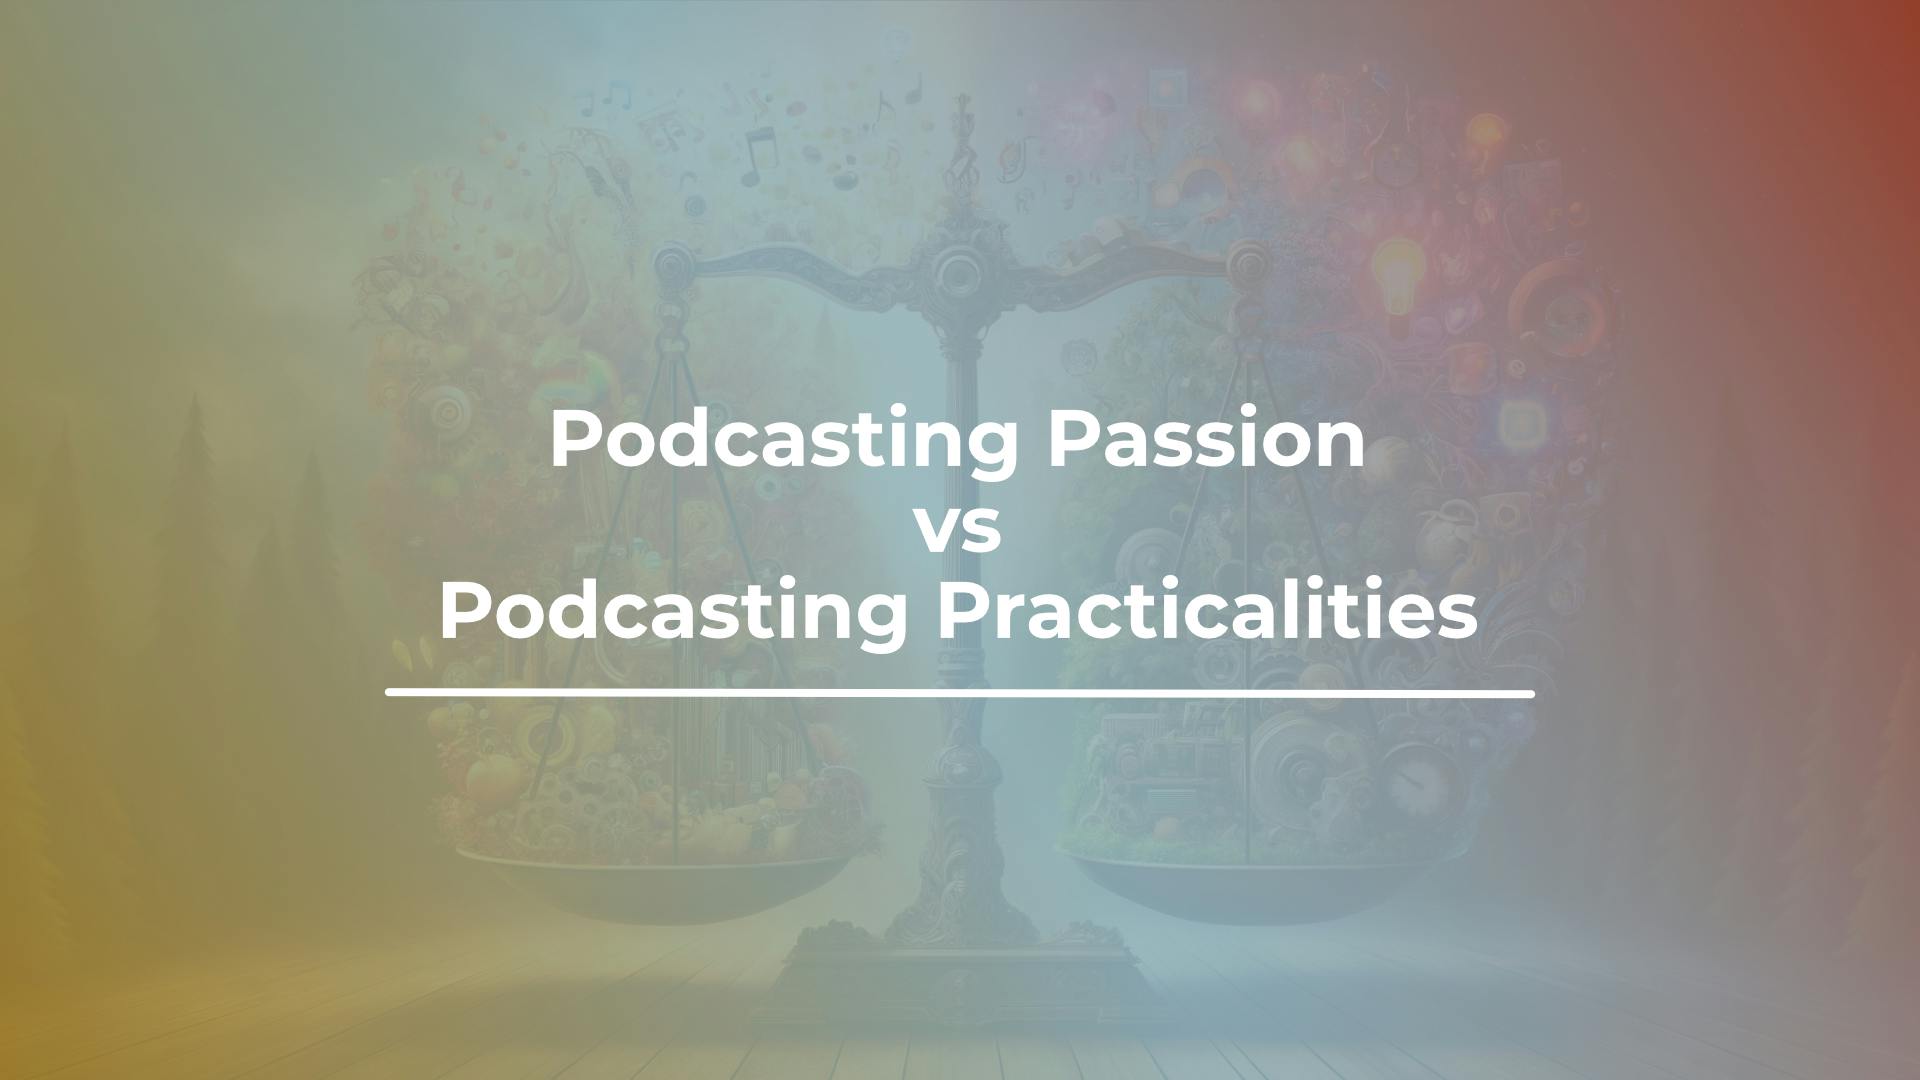 Passion vs Practicalities in Podcasting